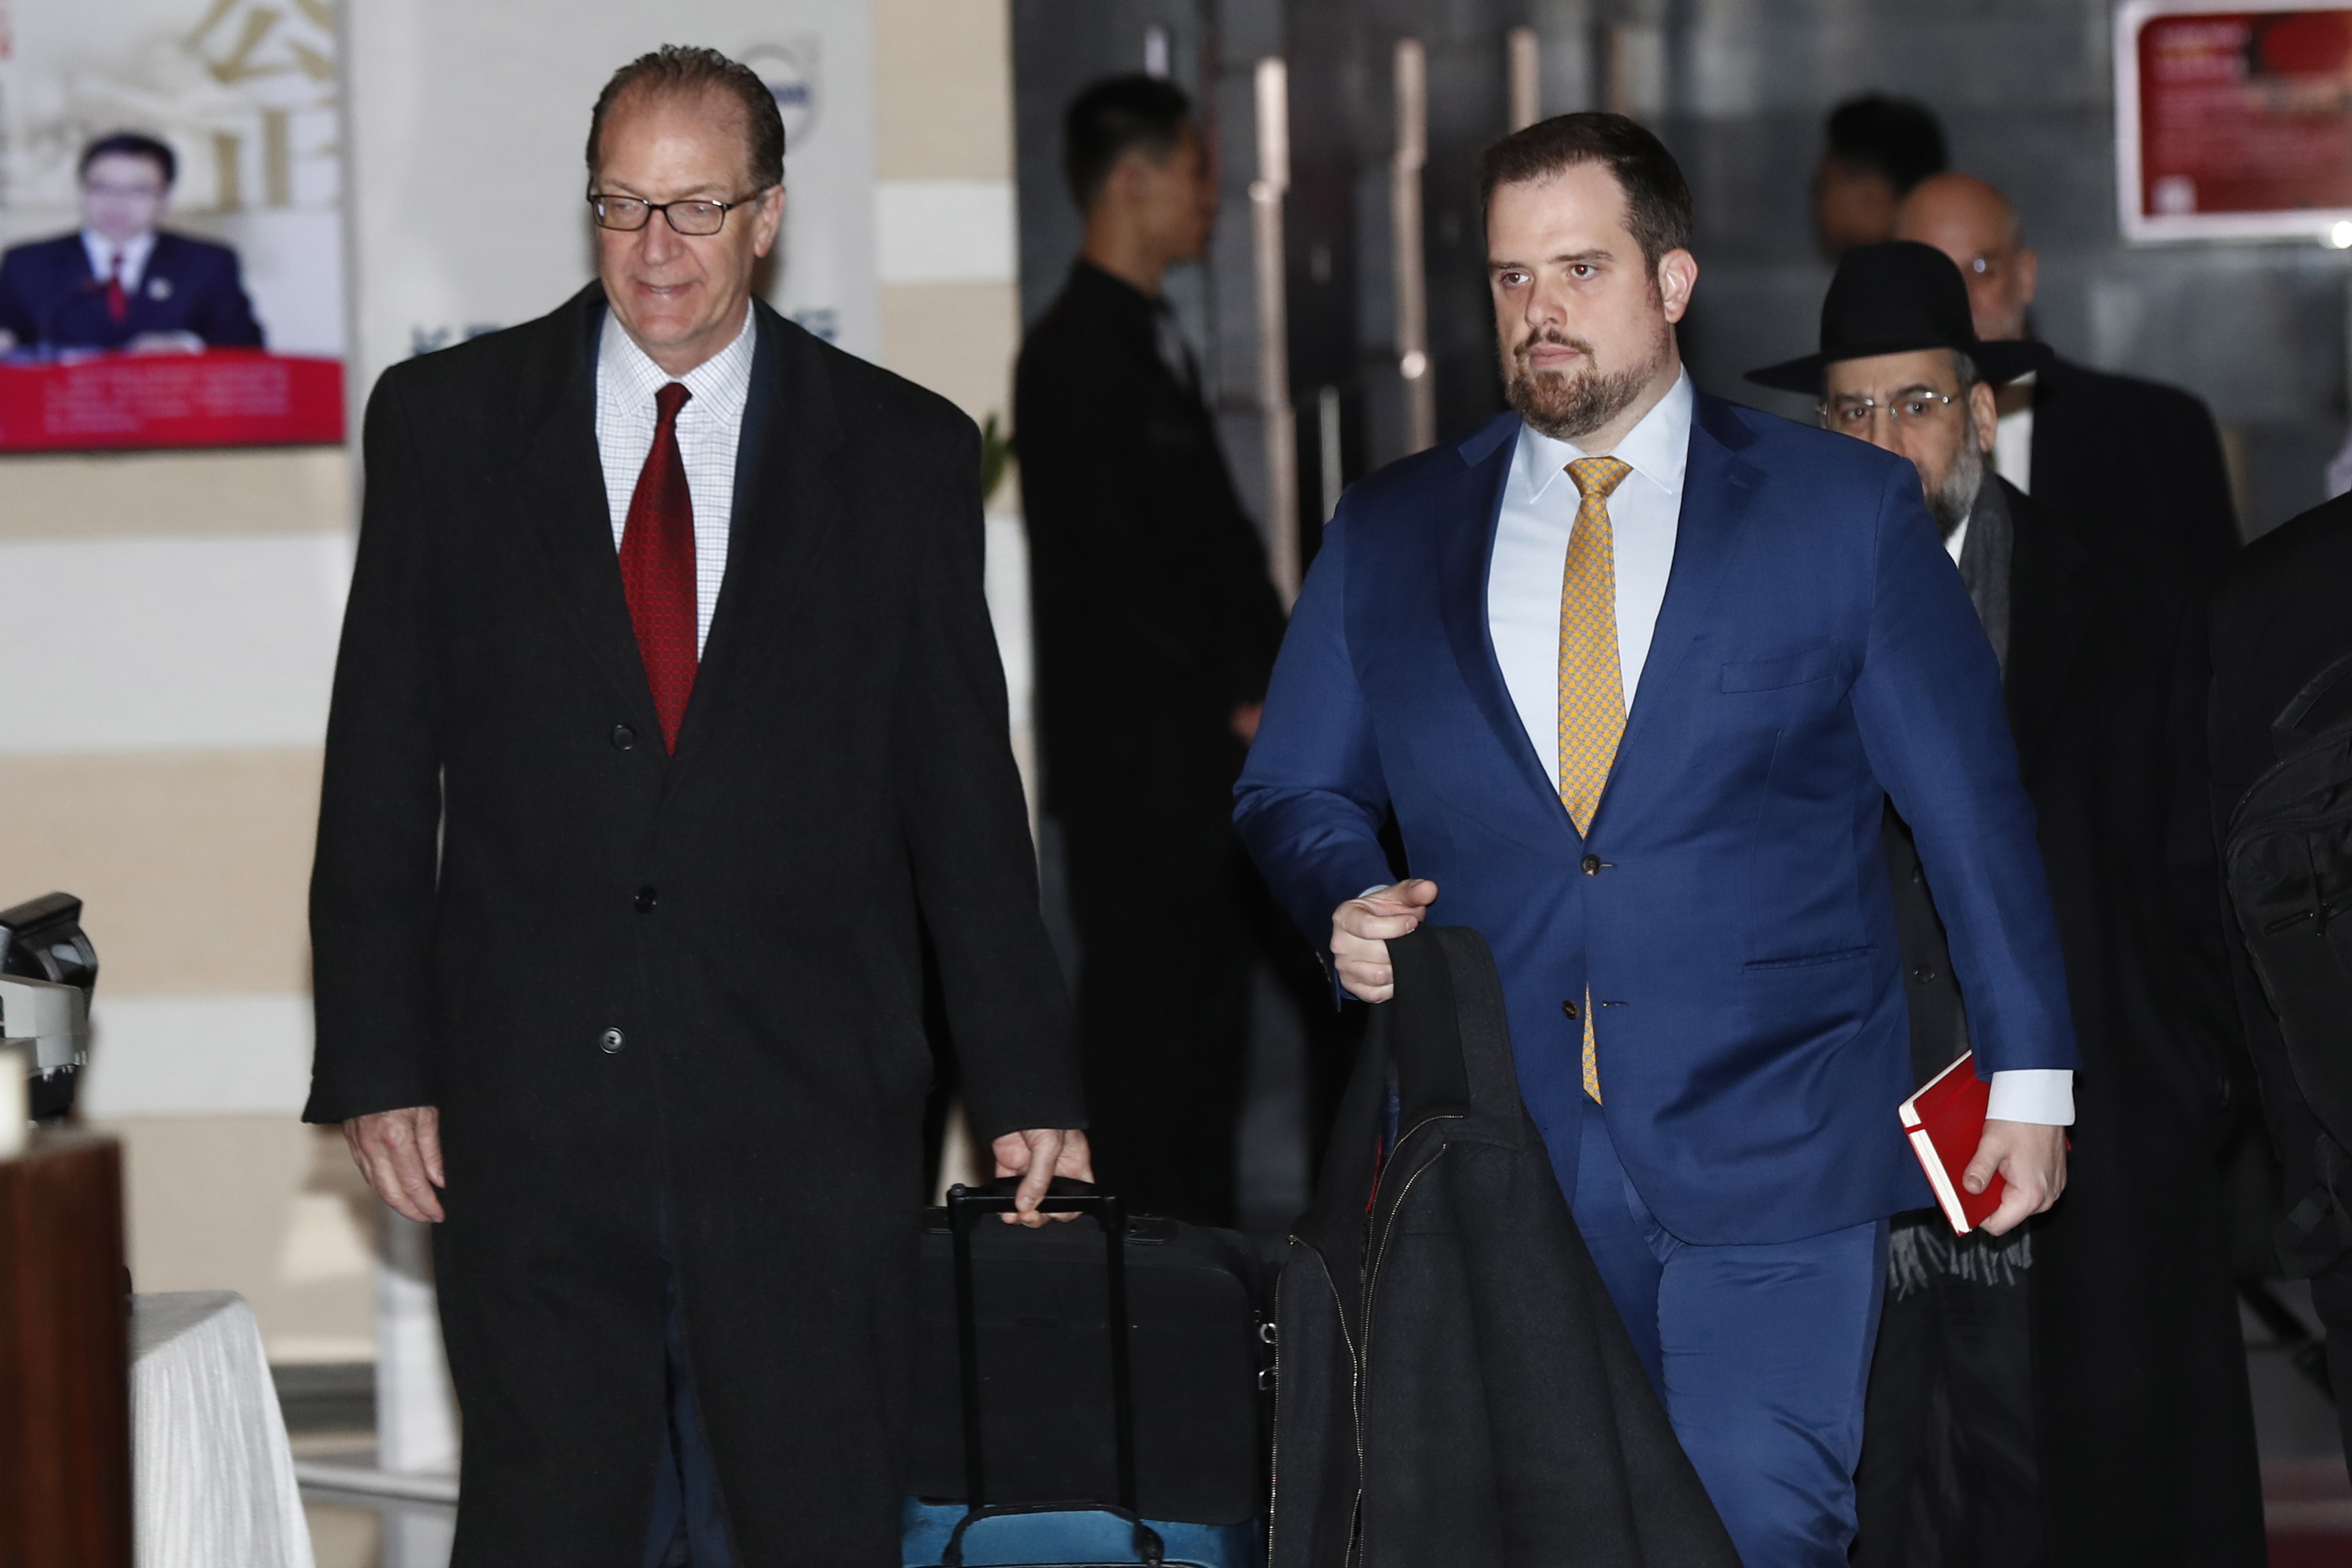 epa07268551 US Undersecretary for International Affairs David Malpass (L) walks with others delegates as they leave the Westin Hotel in Beijing, China, 08 January 2019. The US delegation arrived in Beijing for the start of two-day trade talks between China and US.  EPA/WU HONG